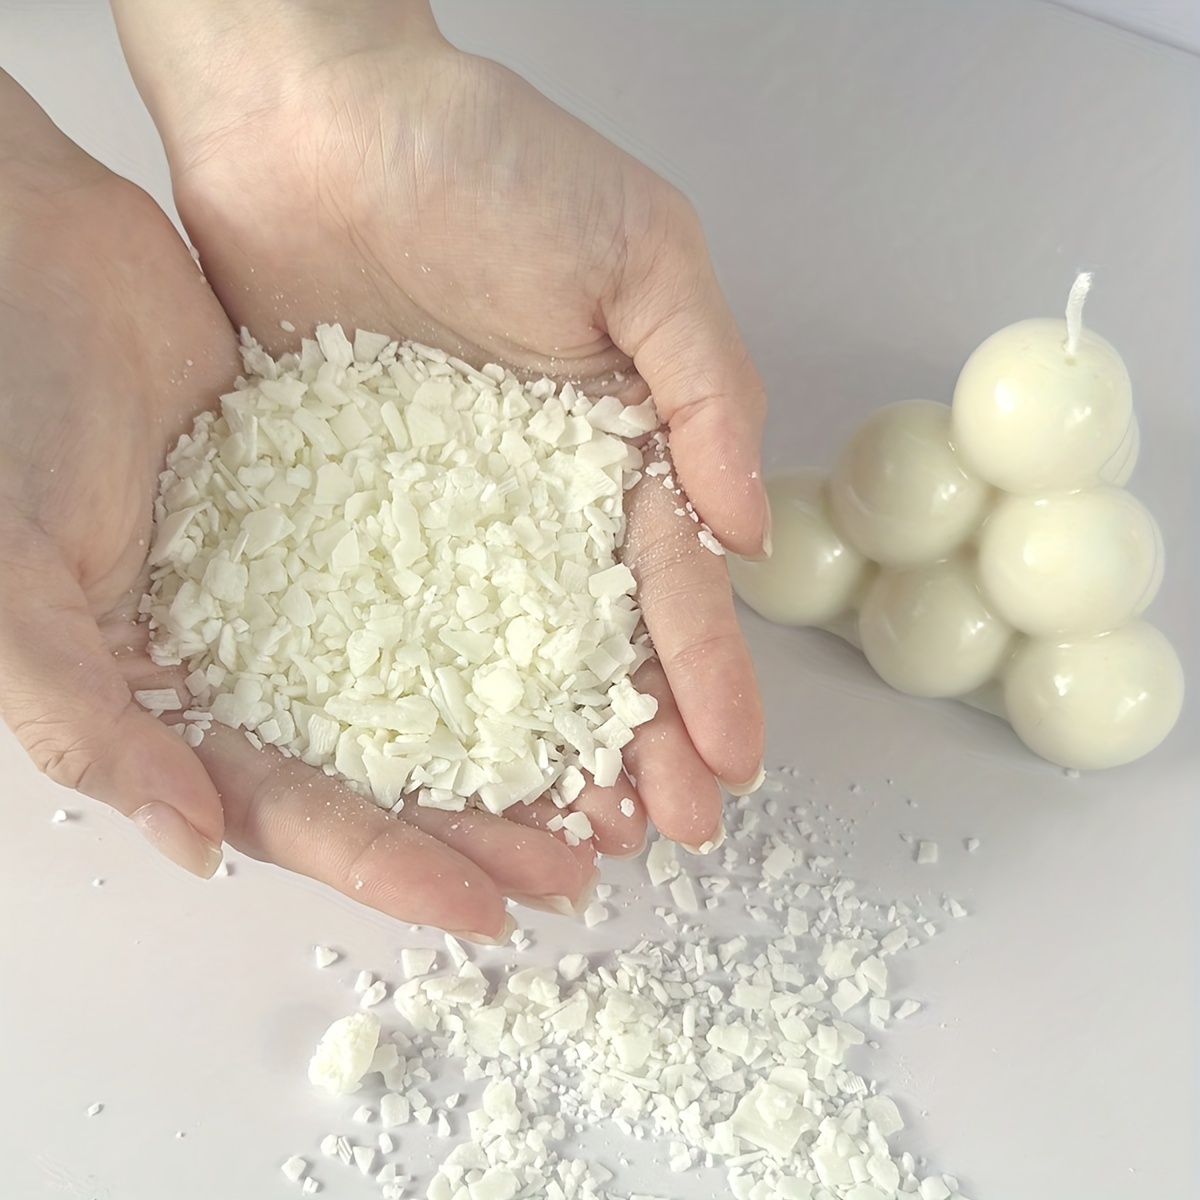  1.1LB Coconut Wax for Candle Making - Coconut Candle